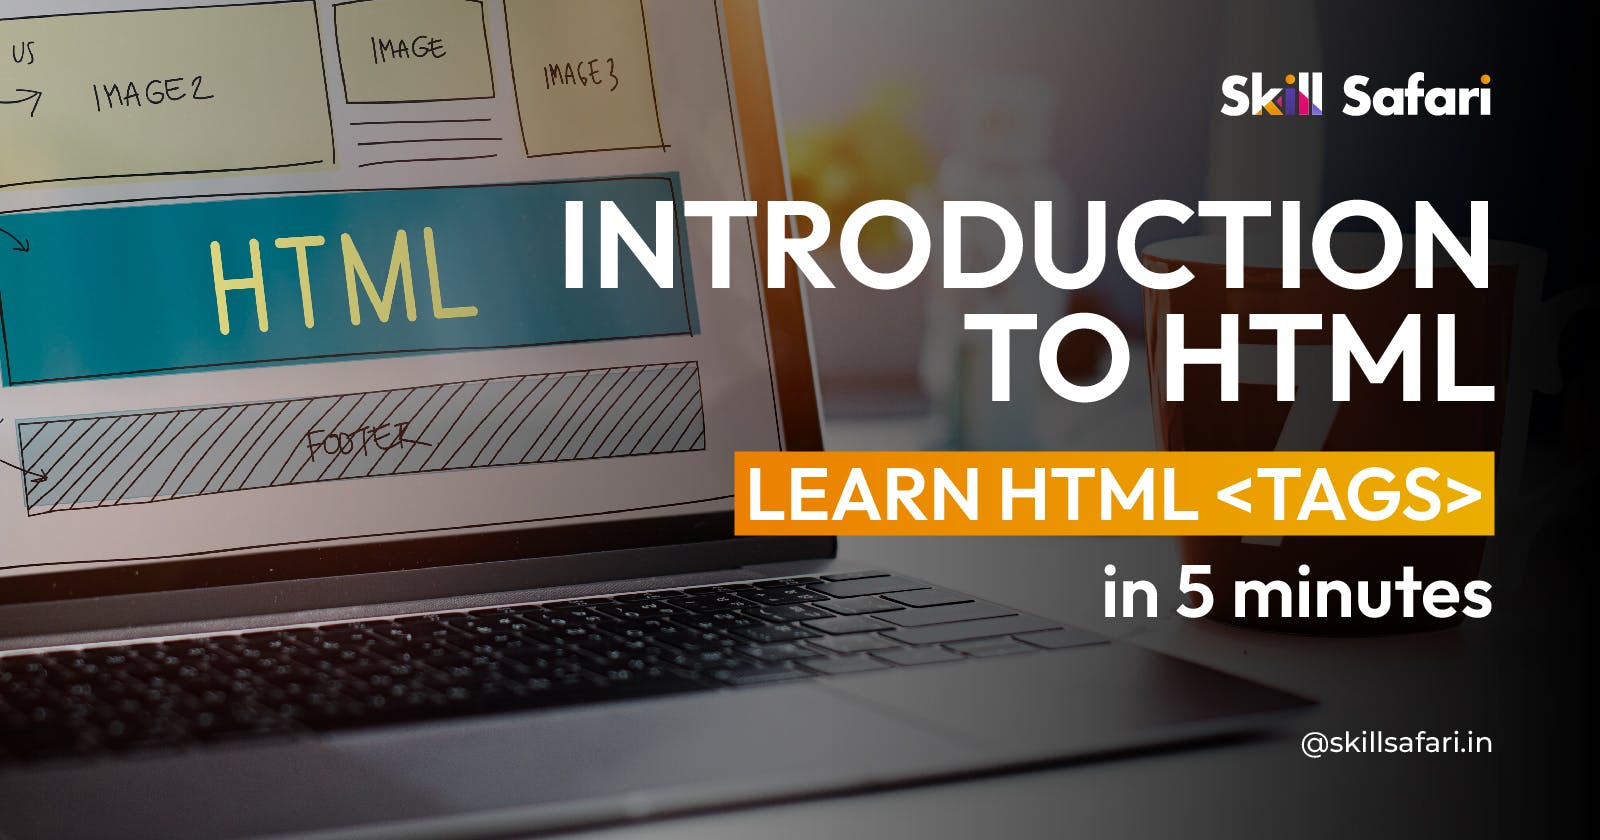 Introduction to HTML- Learn HTML  Tags in 5 minutes